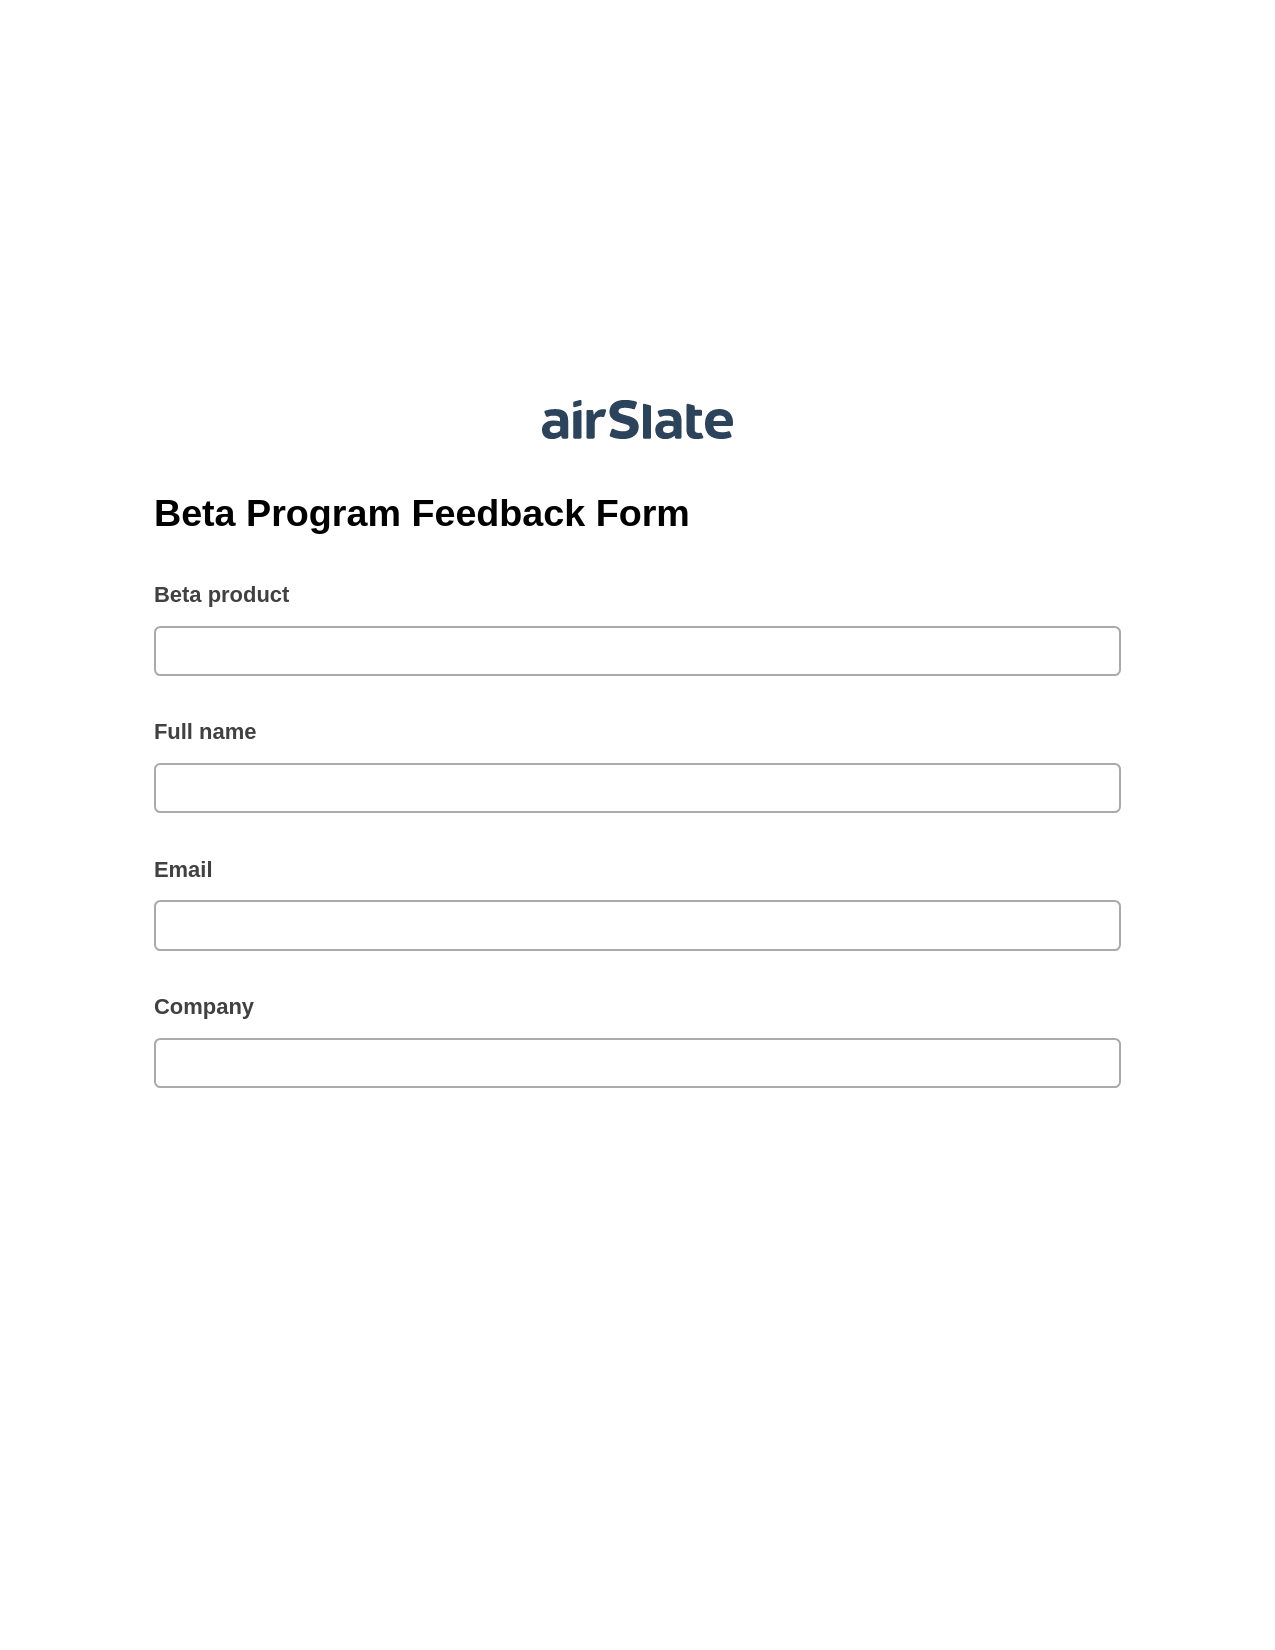 Multirole Beta Program Feedback Form Pre-fill Dropdowns from CSV File Bot, Add Tags to Slate Bot, Export to Excel 365 Bot